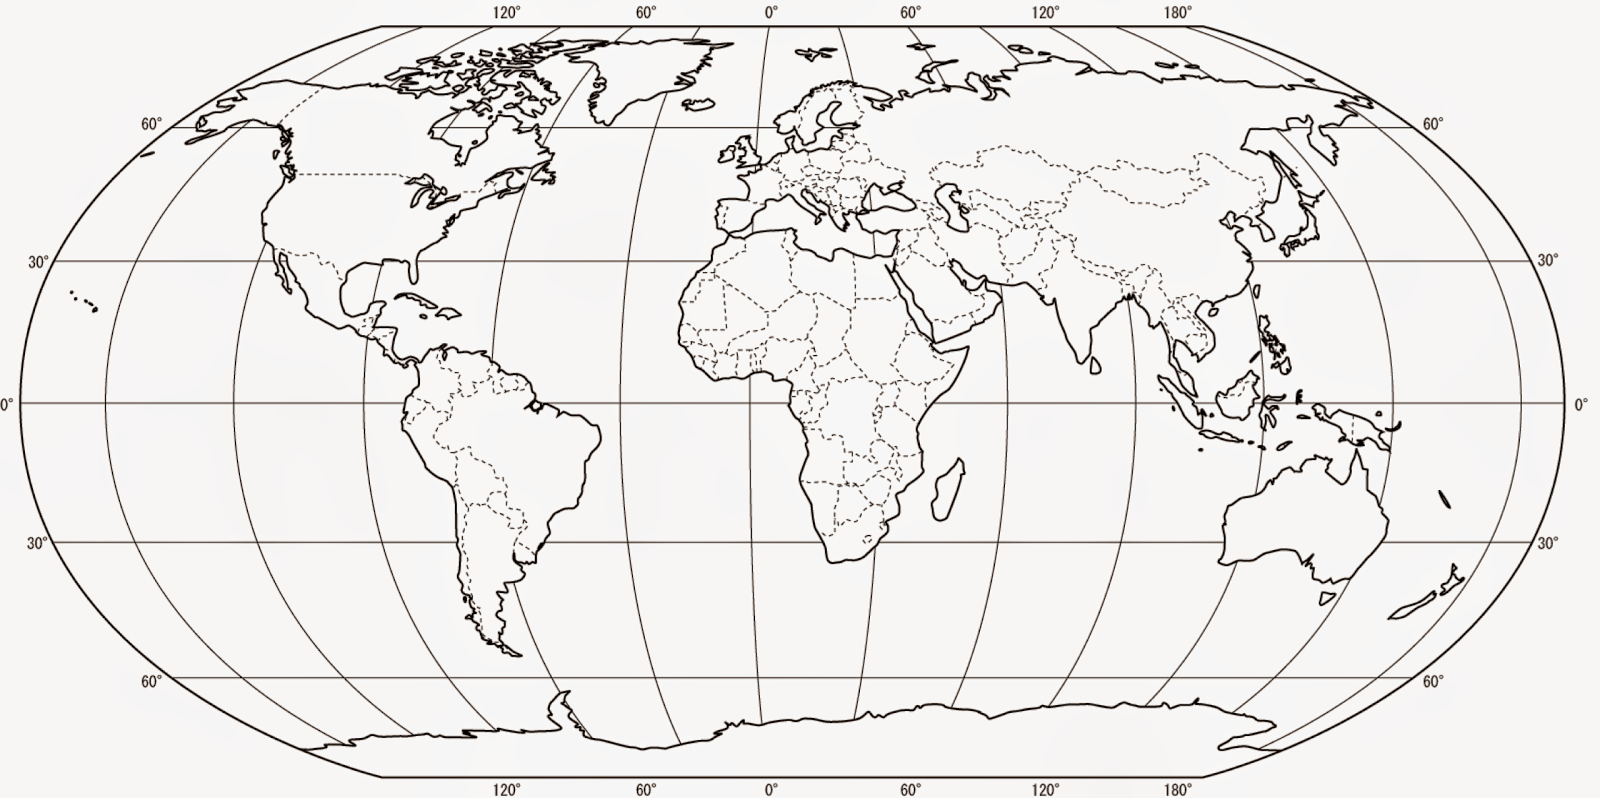 World Map Continents Black And White